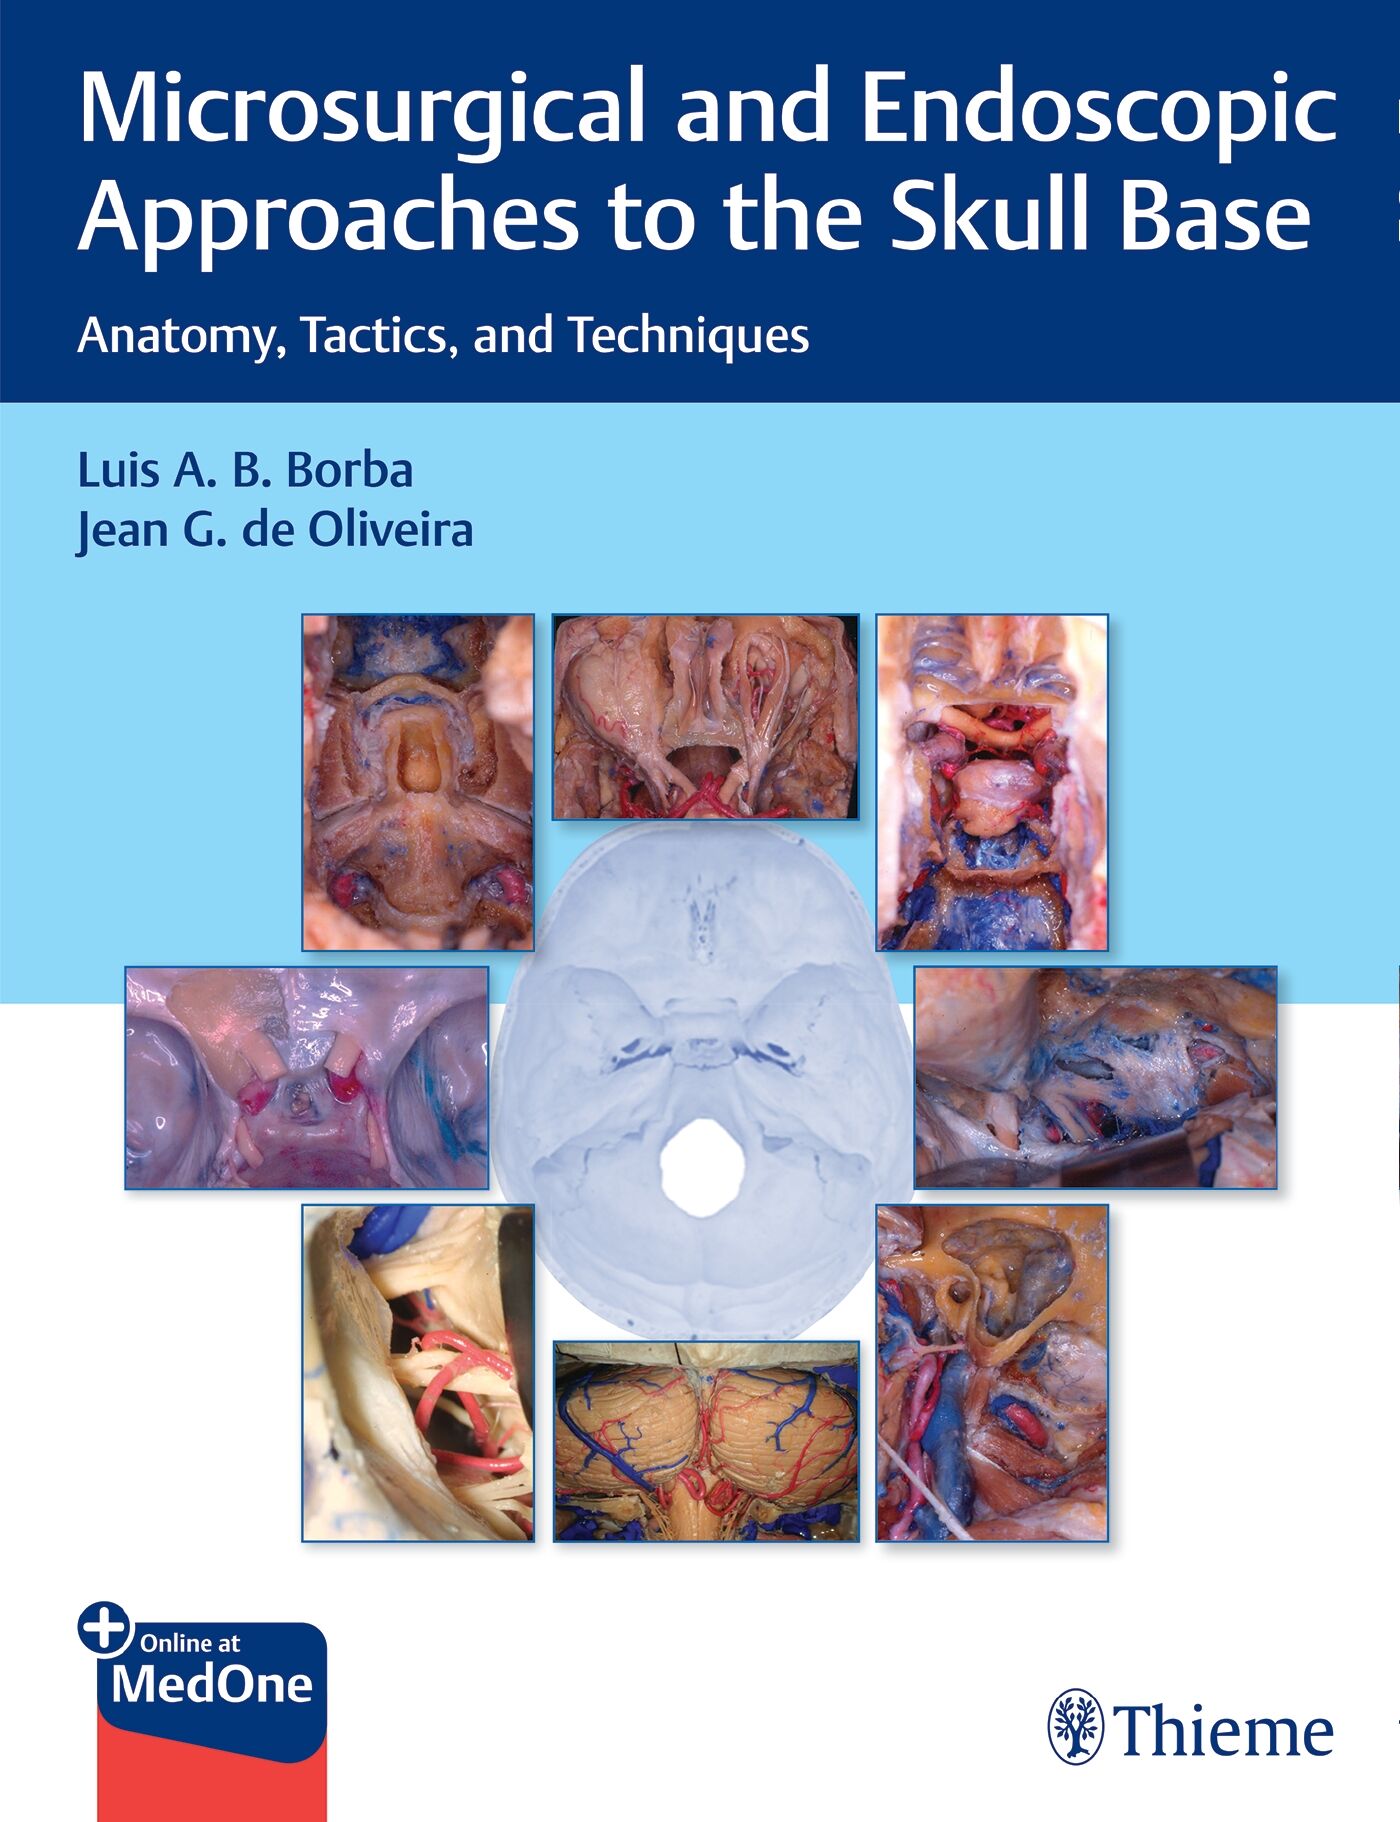 Microsurgical and Endoscopic Approaches to the Skull Base, 9781638536062